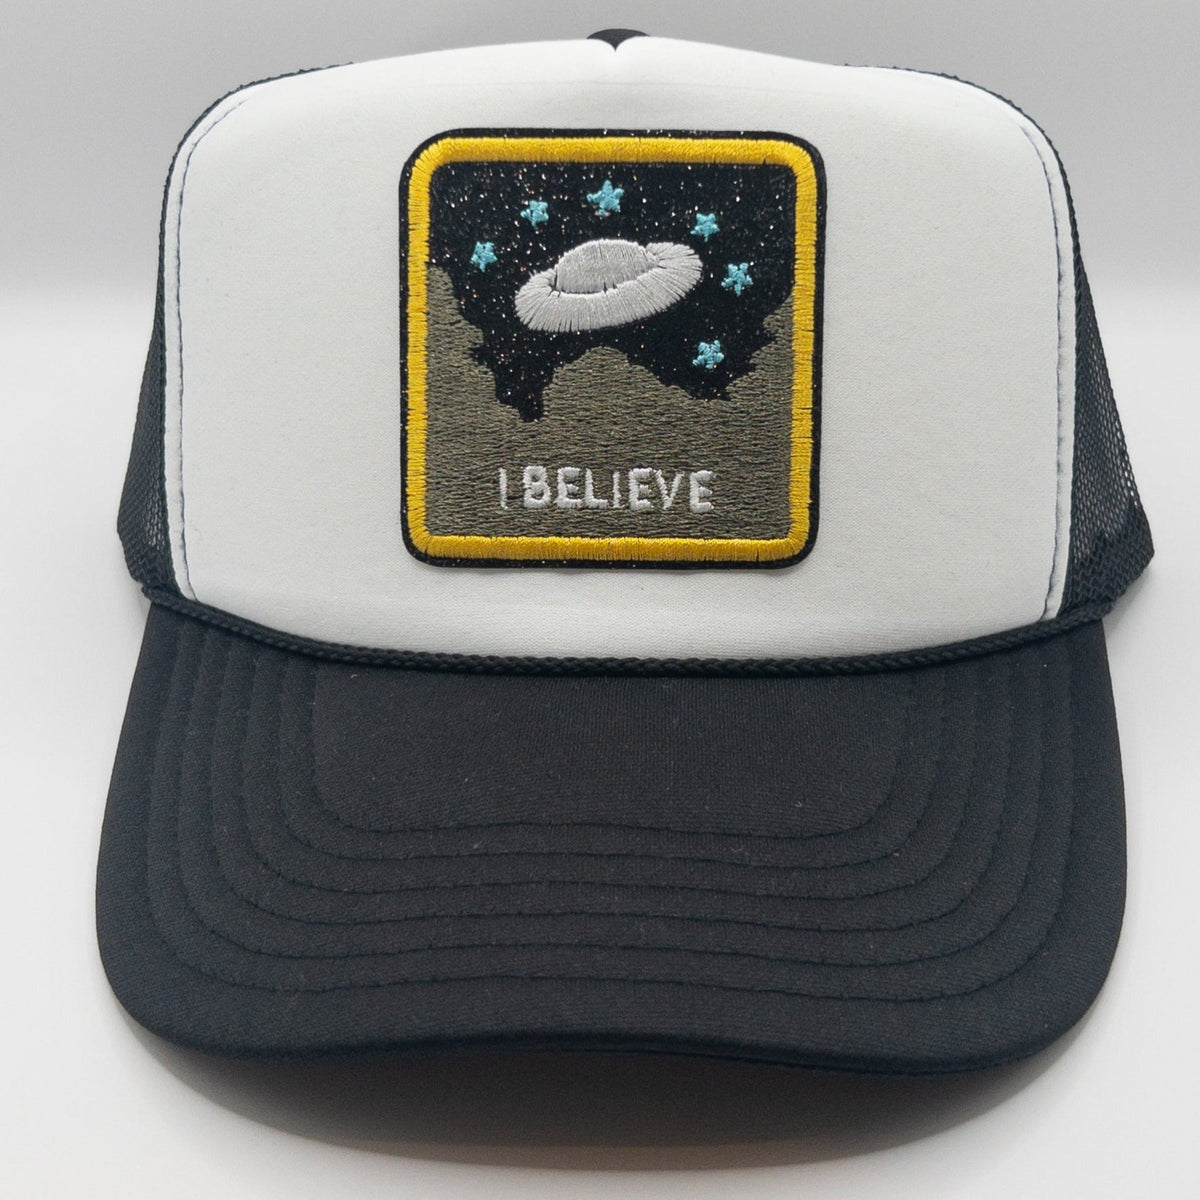 I Believe Alien Hat | Patch Trucker Hat | Black and White Hat Hats TheFringeCultureCollective